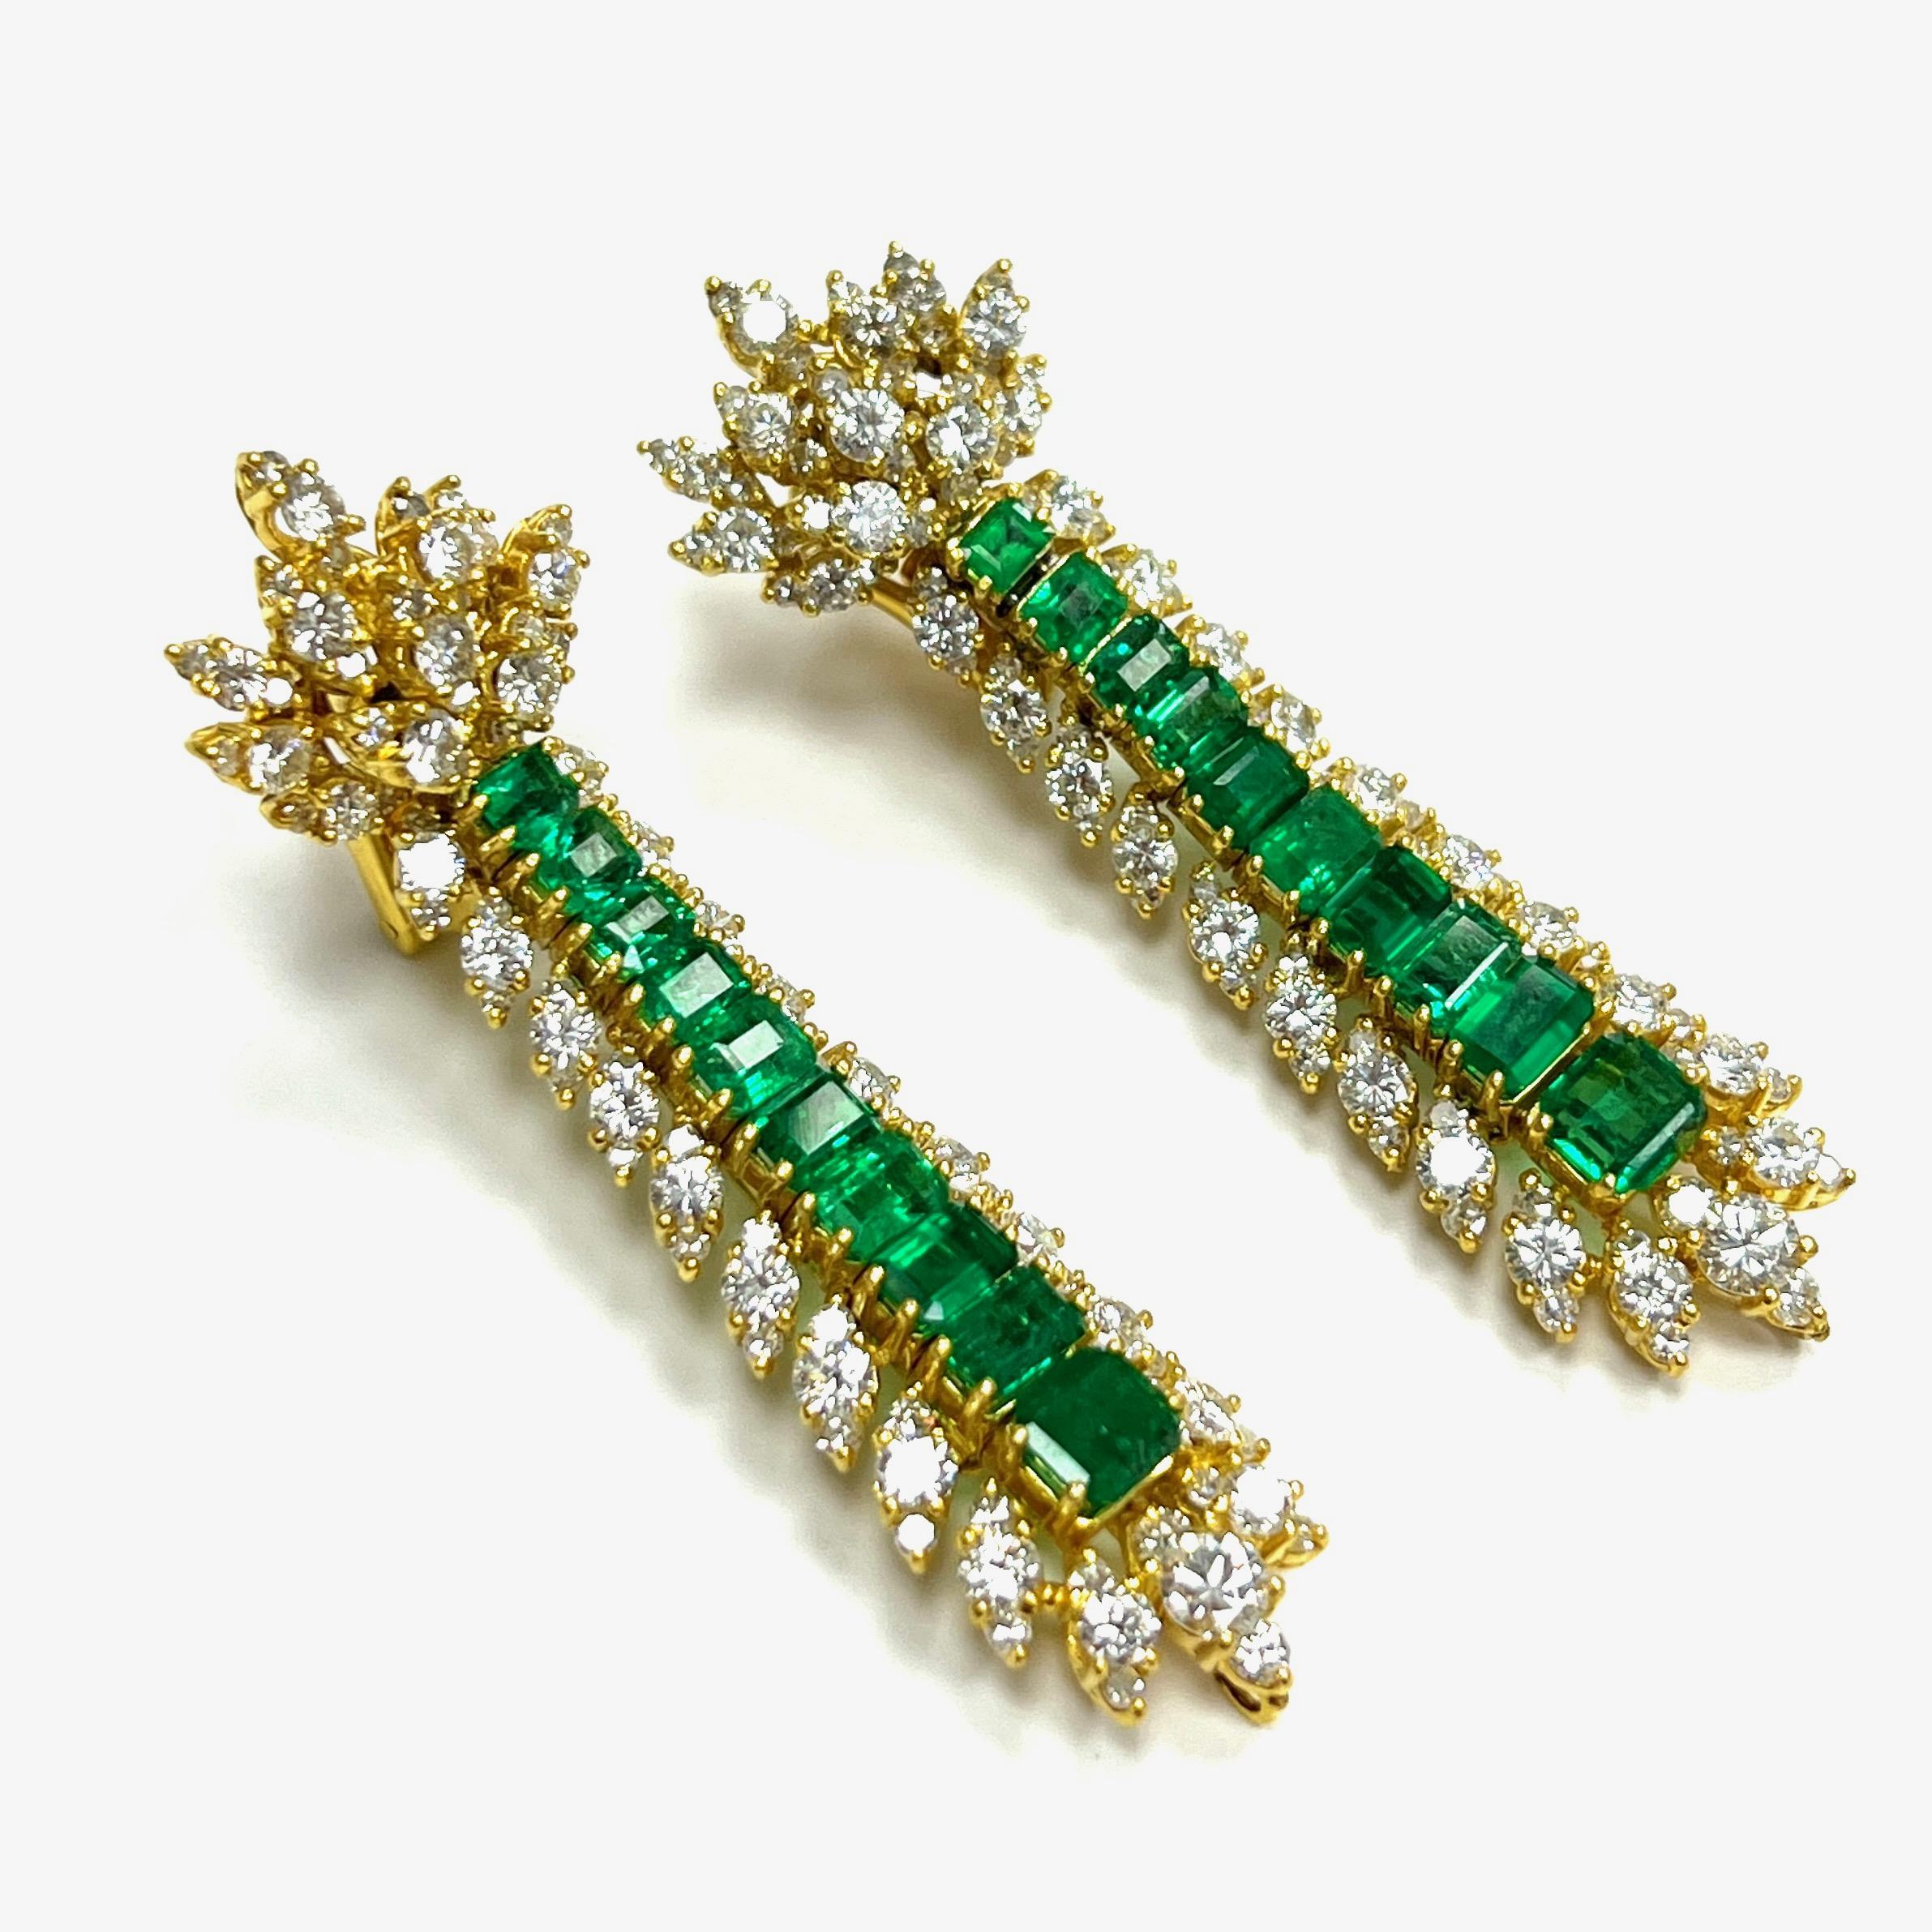 Emerald Diamond Drop Yellow Gold Earrings

Emerald-cut emeralds of approximately 7-8 carats, one hundred ninety-six round and single-cut diamonds of approximately 6 carats, set on yellow gold; marked 132767

Size: width 0.5 inch, length 2.25